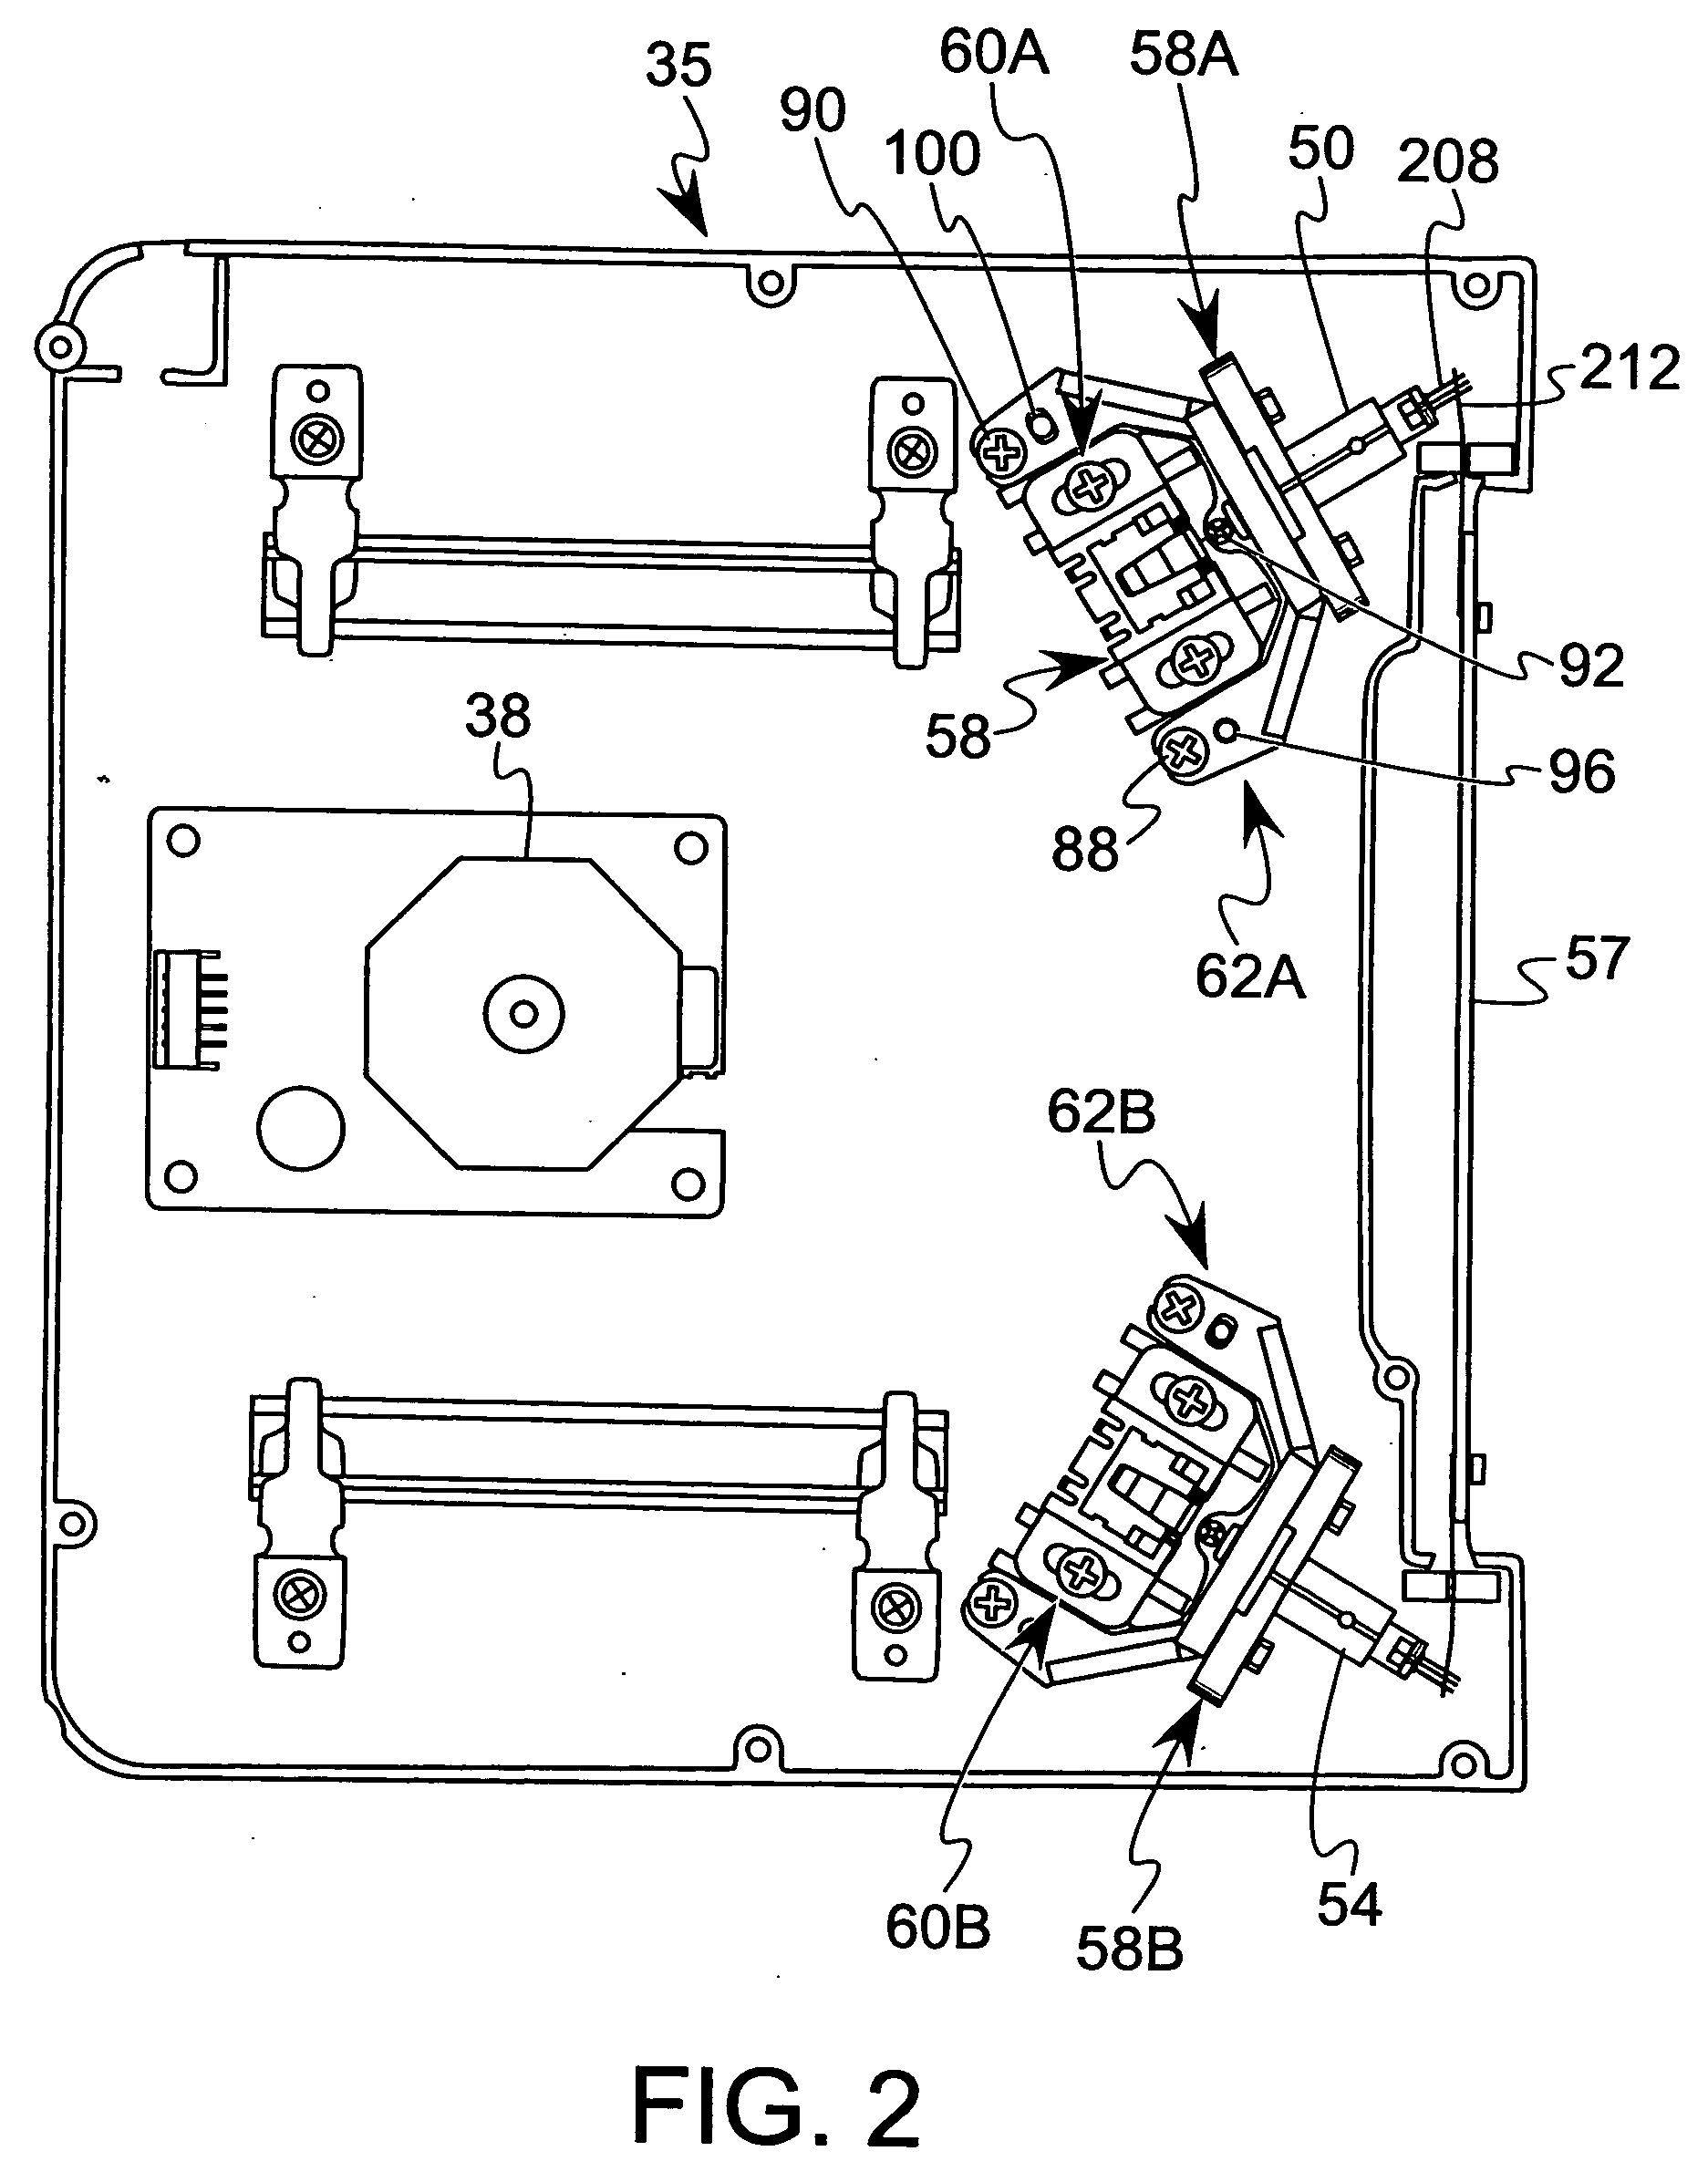 Collimation assembly with an adjustment bracket capable of flexing when receiving a light source